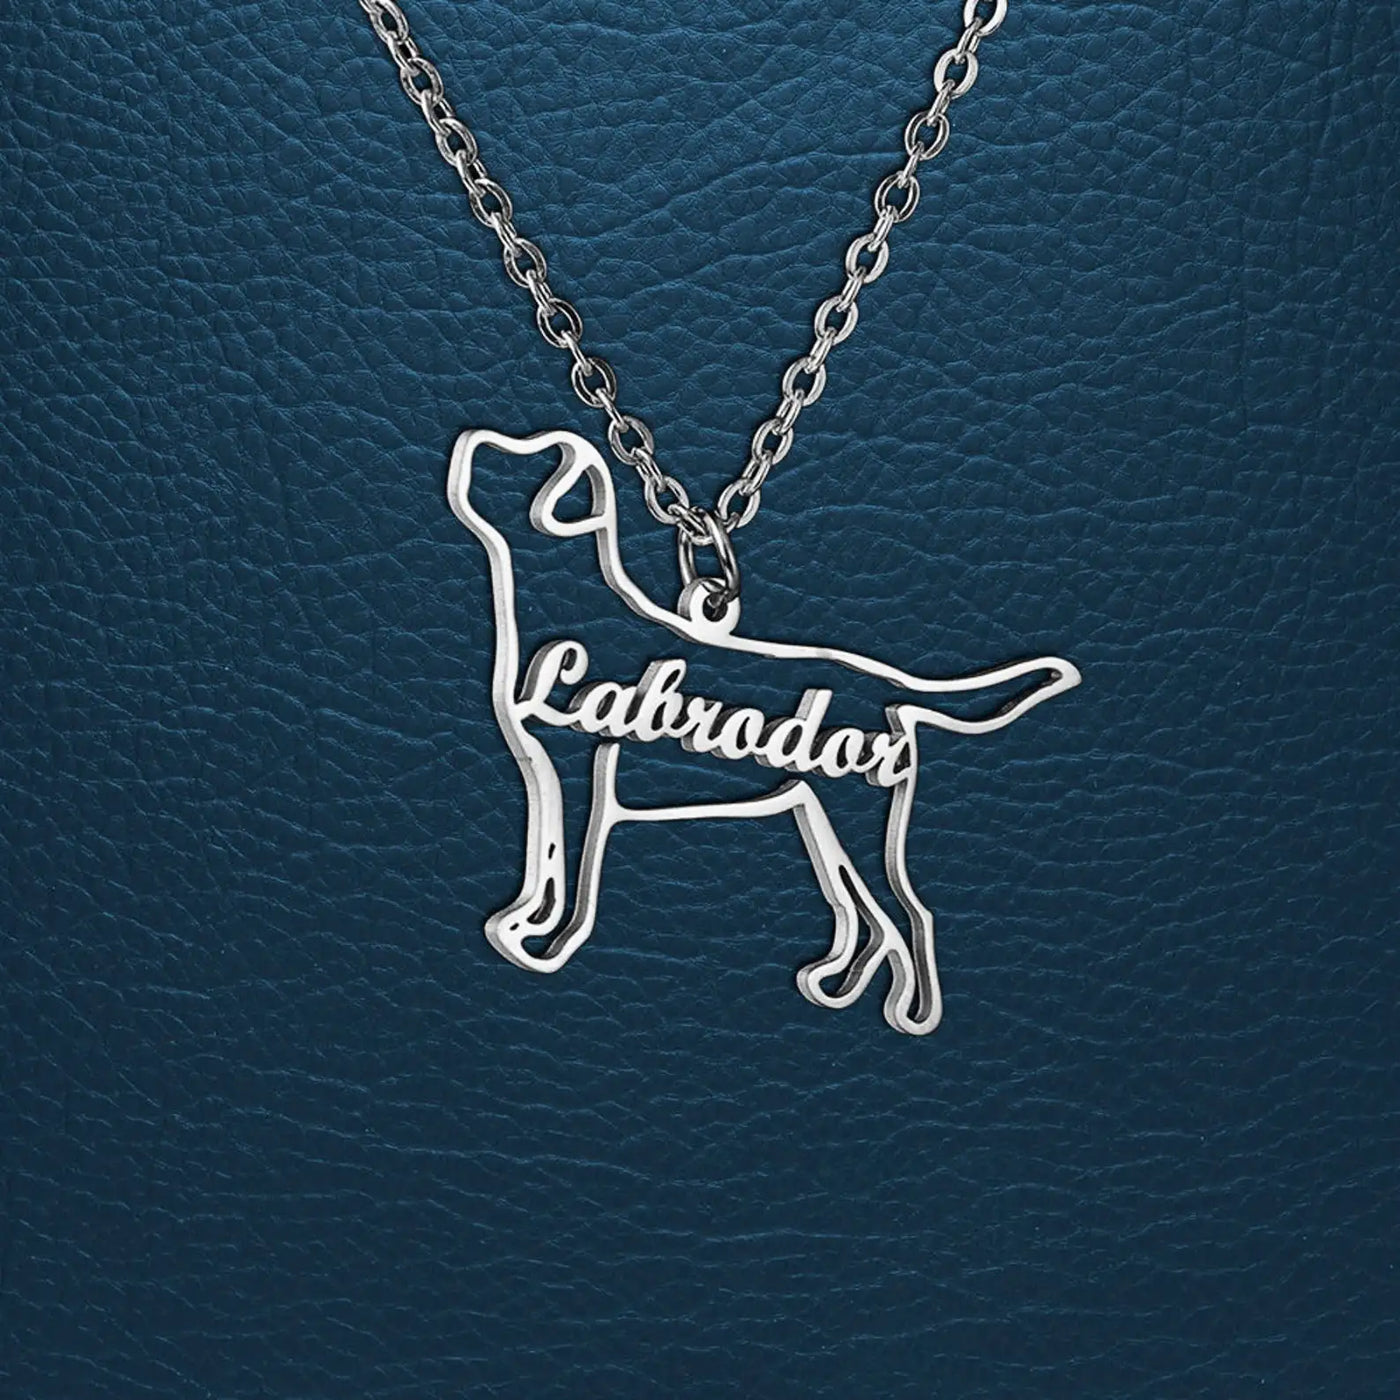 iPetprints Personalized Dog Necklace with Cursive Name